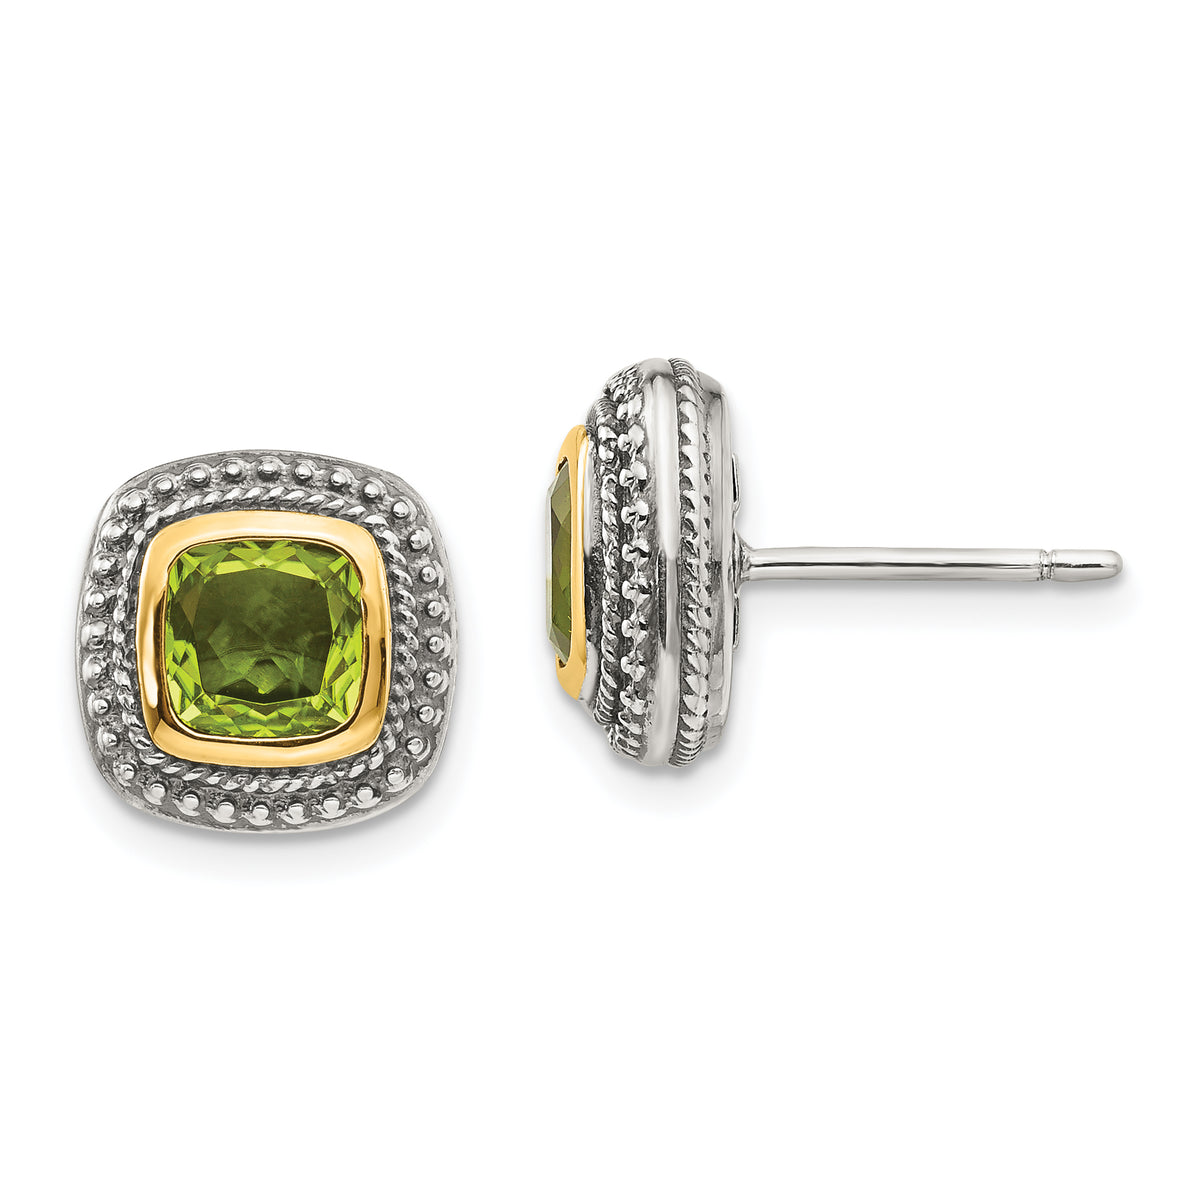 Shey Couture Sterling Silver with 14K Accent Antiqued Cushion Bezel Peridot Post Earrings